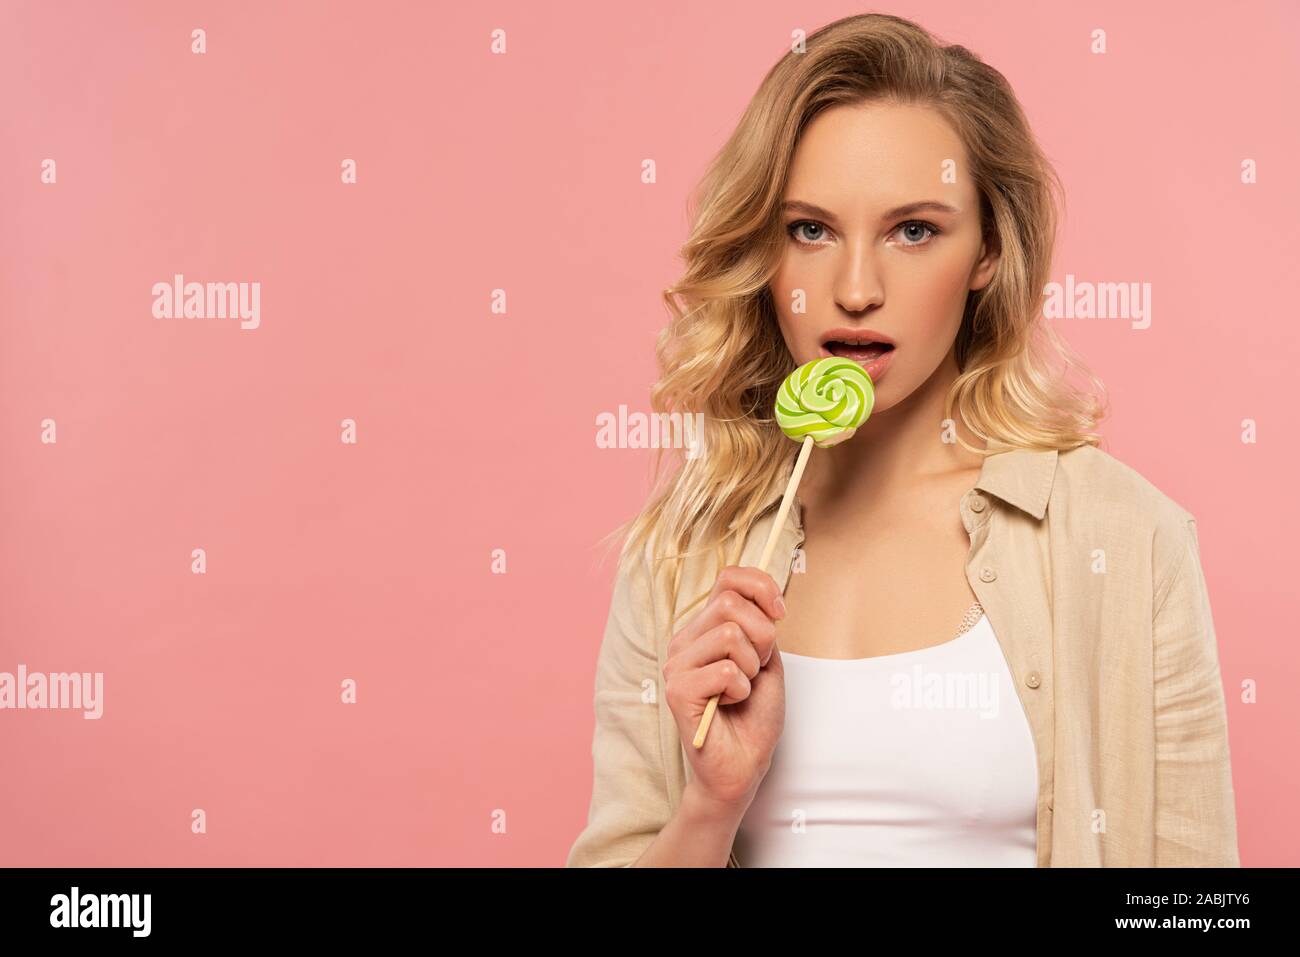 Attractive blonde woman licking lollipop isolated on pink Stock Photo